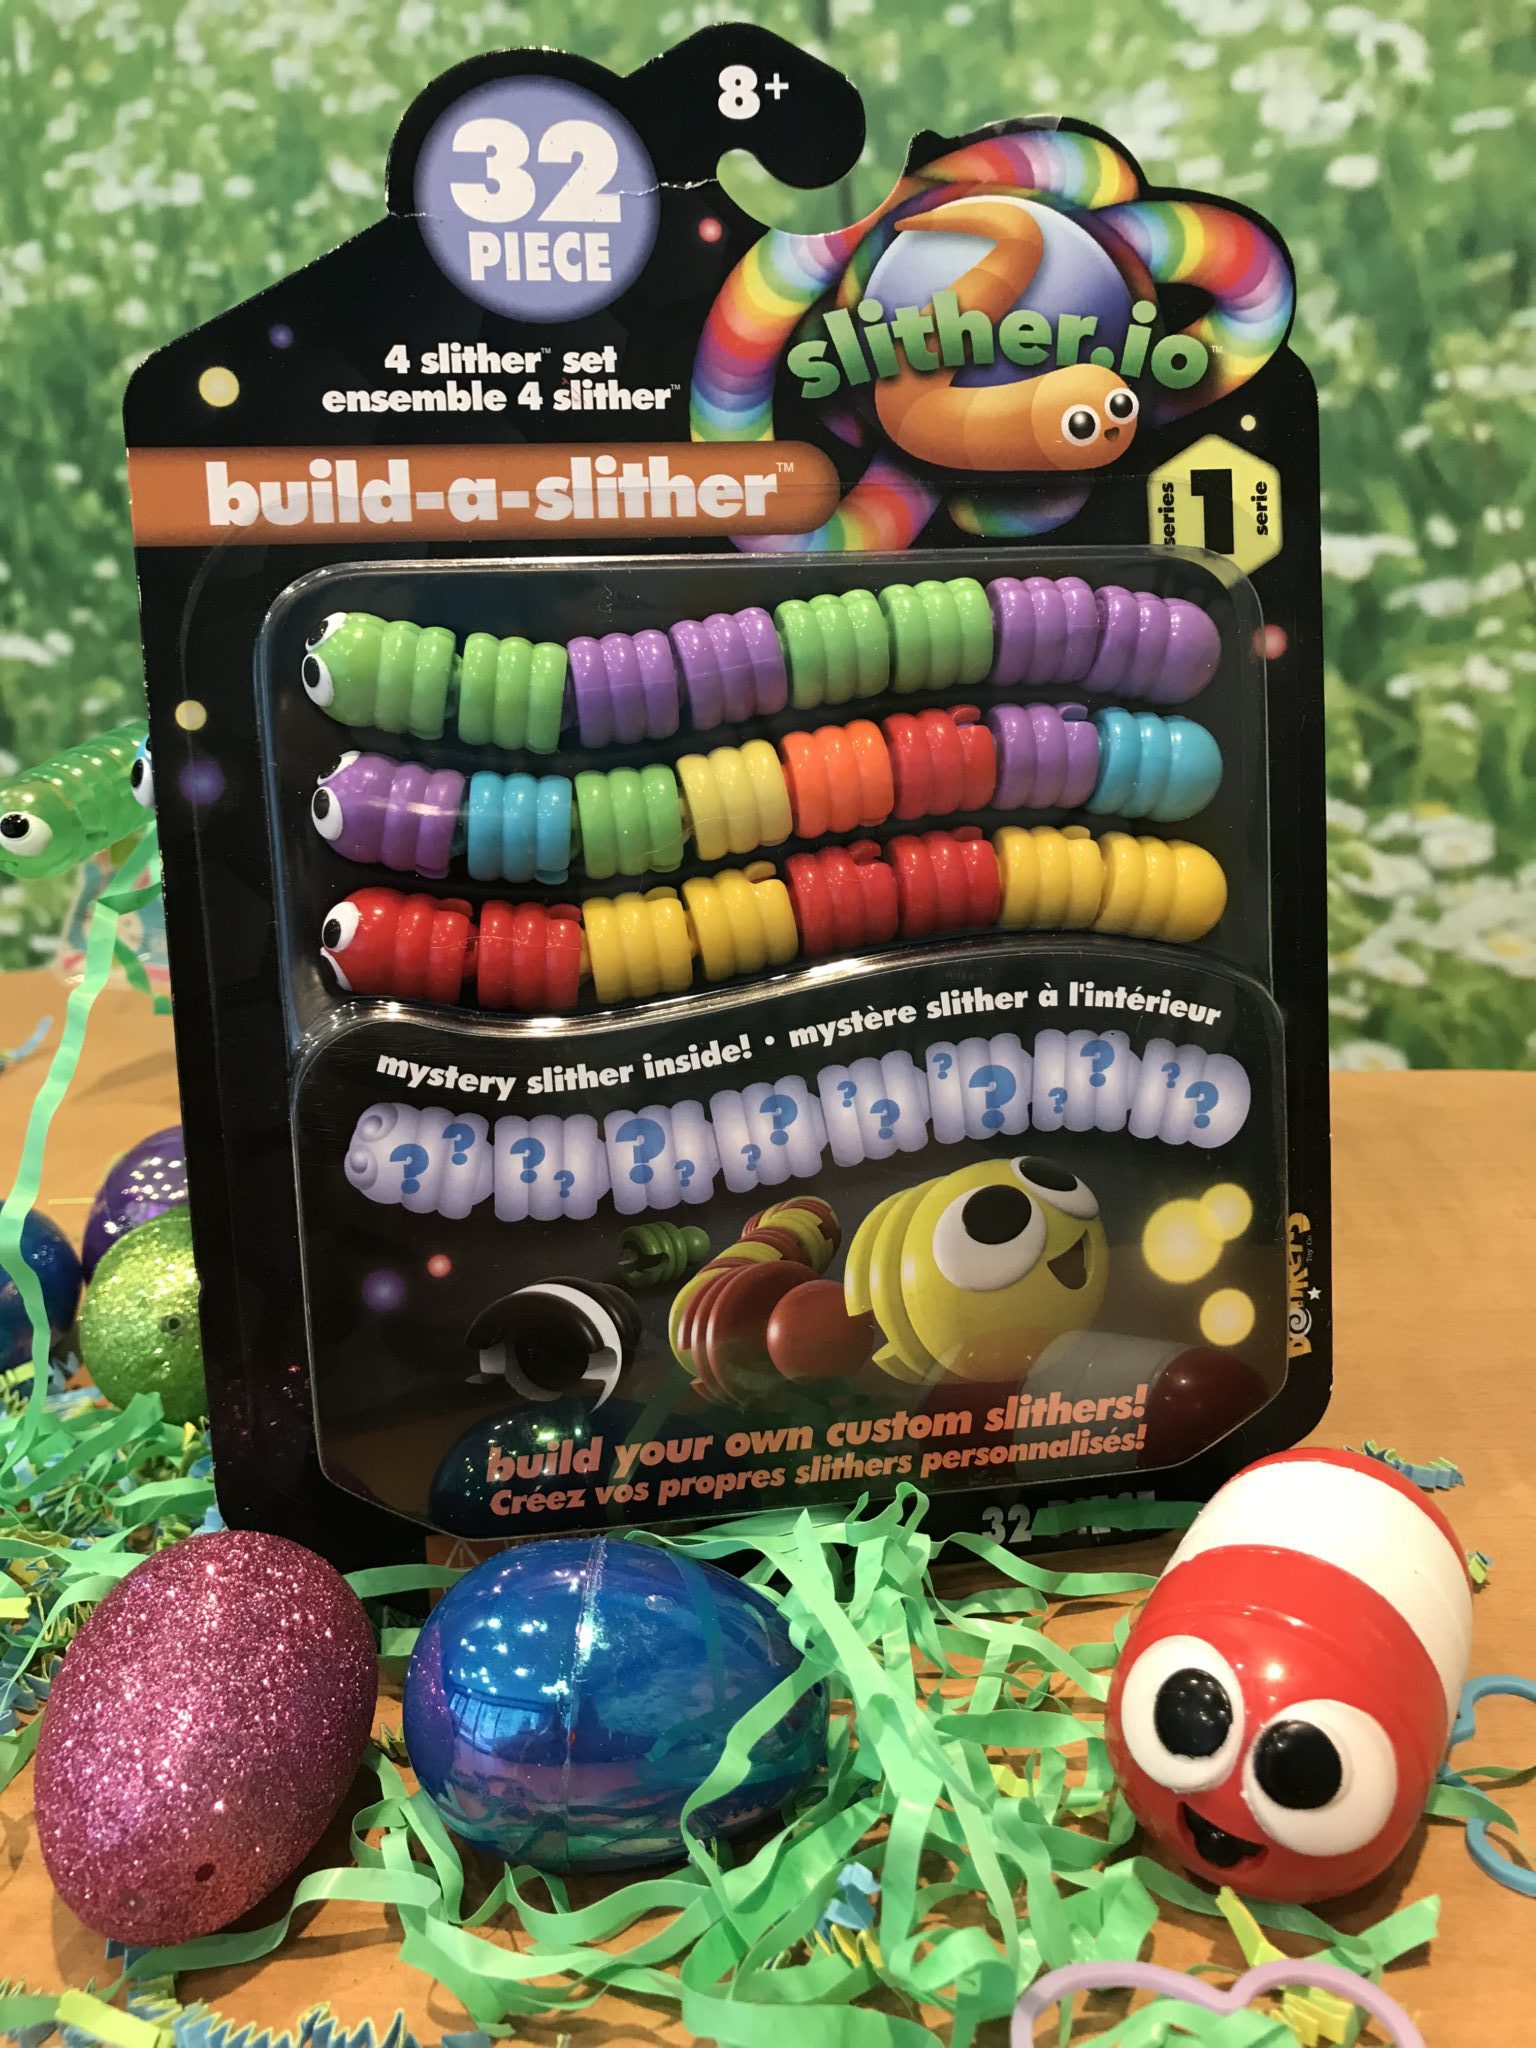 Slither-io -Gaming Guide For Parents & Review Of The New Toy Range.